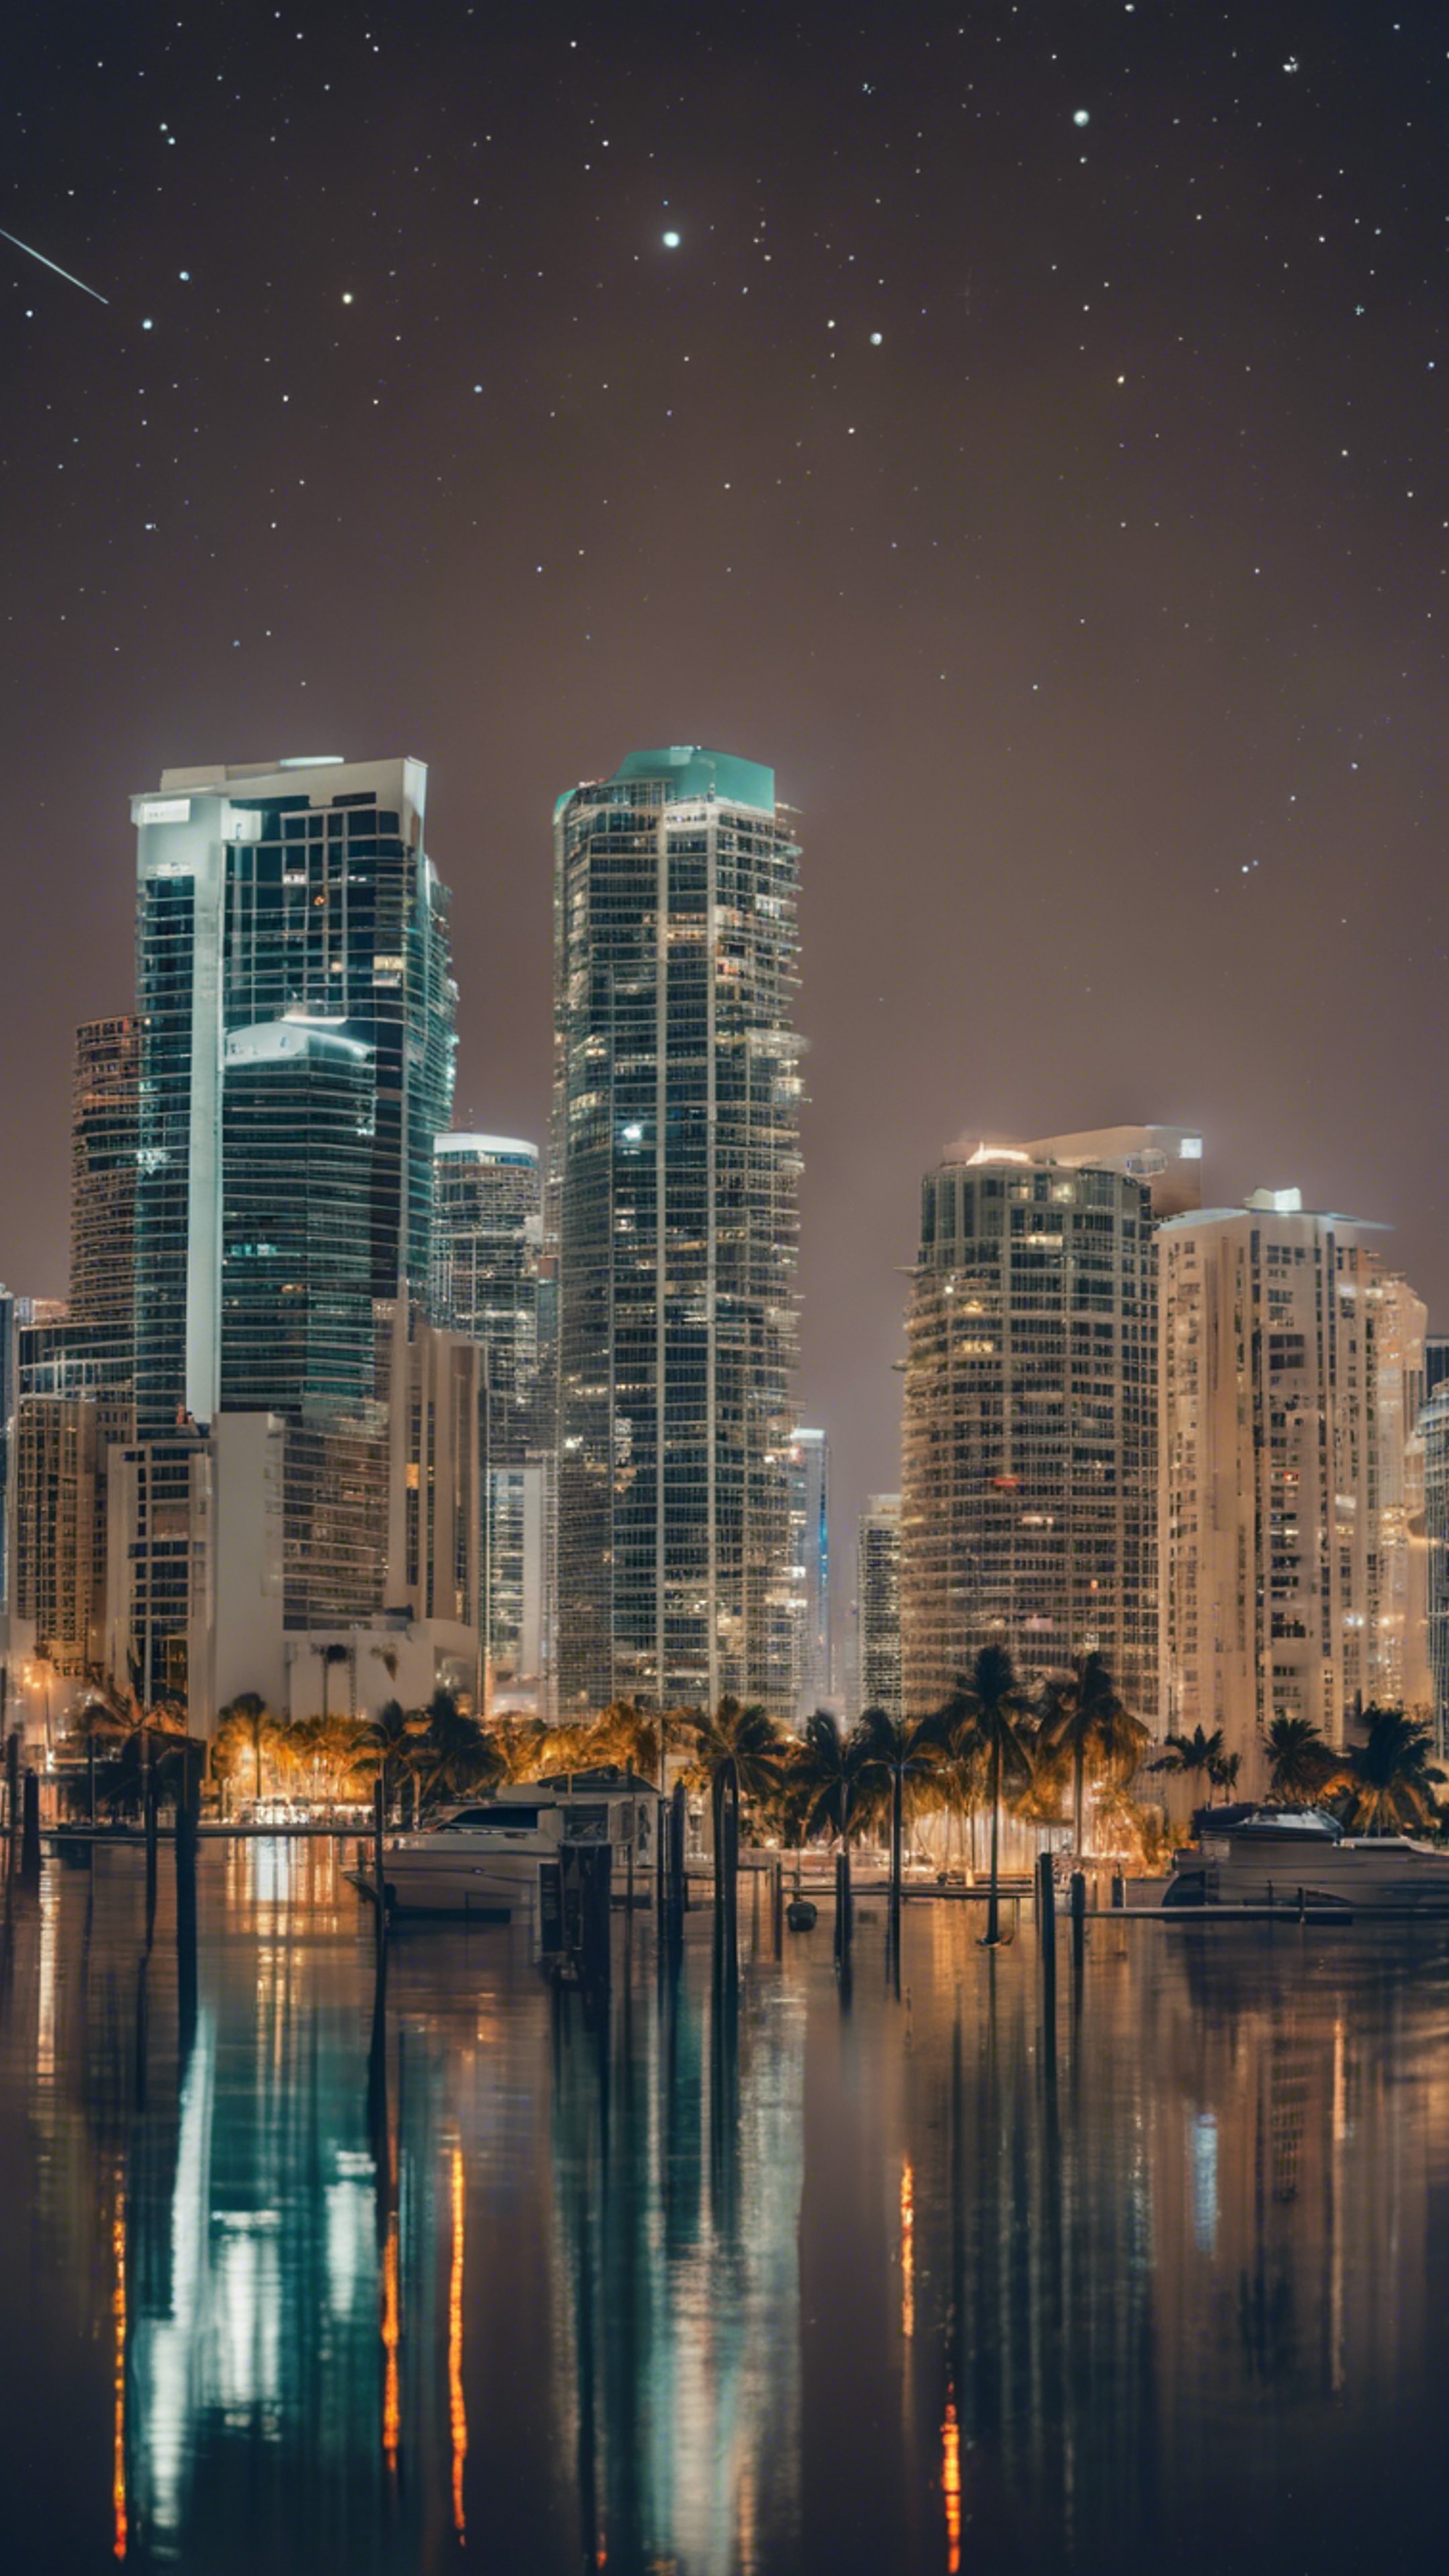 A night view of Miami’s skyline, reflected in the calm waters of Biscayne Bay, under a starry sky. Wallpaper[6a2ec2761bce4e748034]